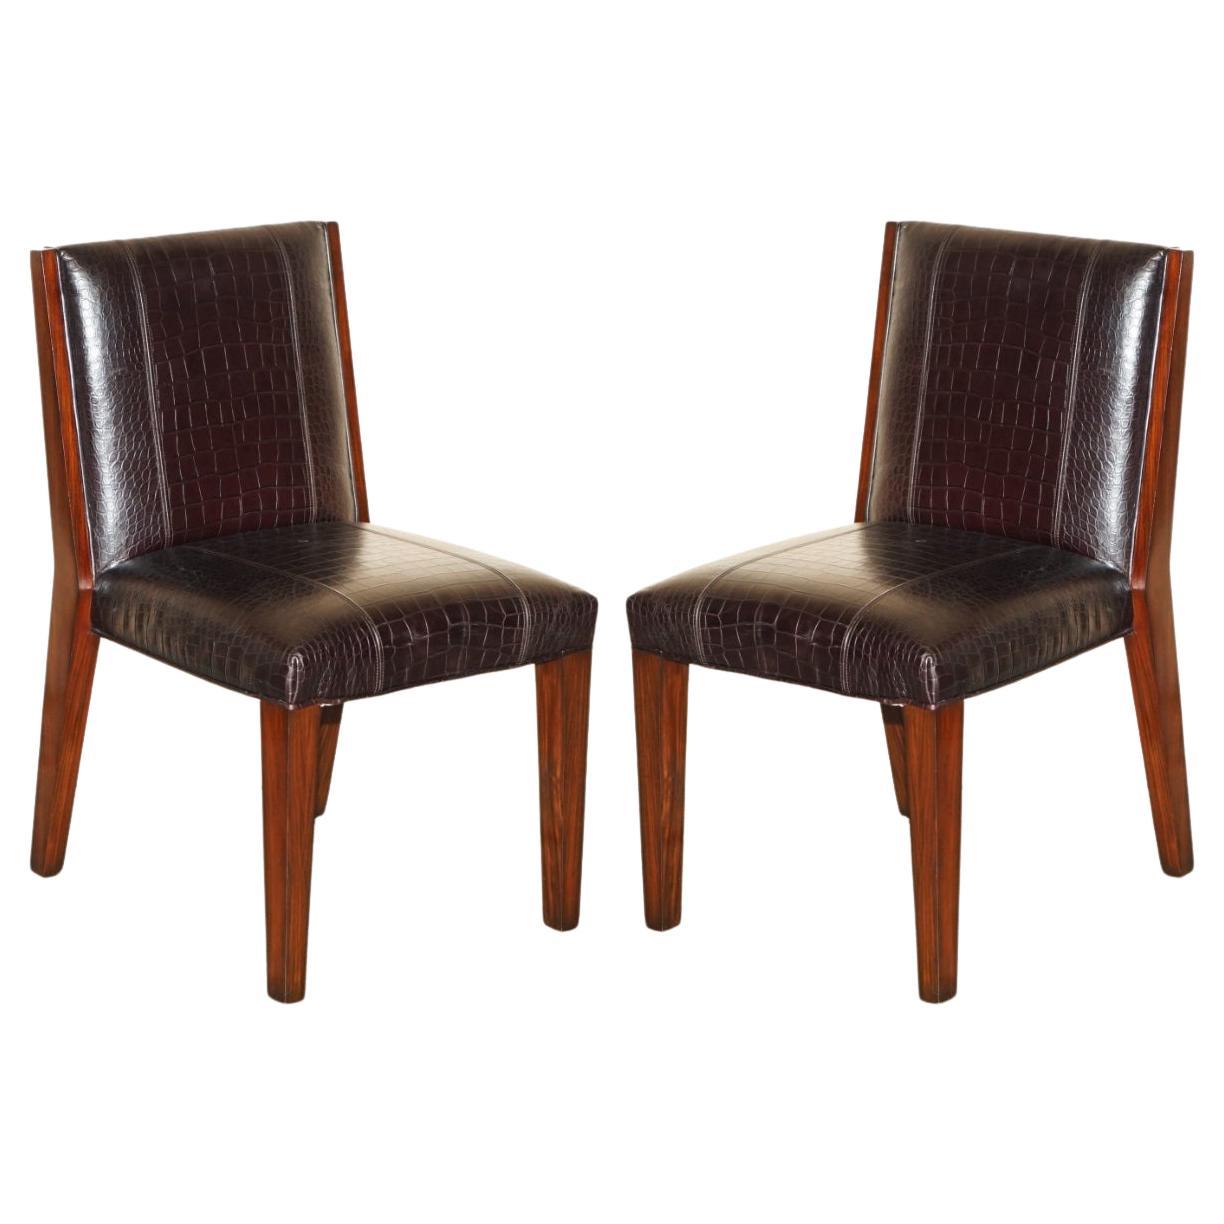 RALPH LAUREN METROPOLIS SiDE OCCASIONAL CROCODILE PATINA LEATHER DINING CHAIRS For Sale